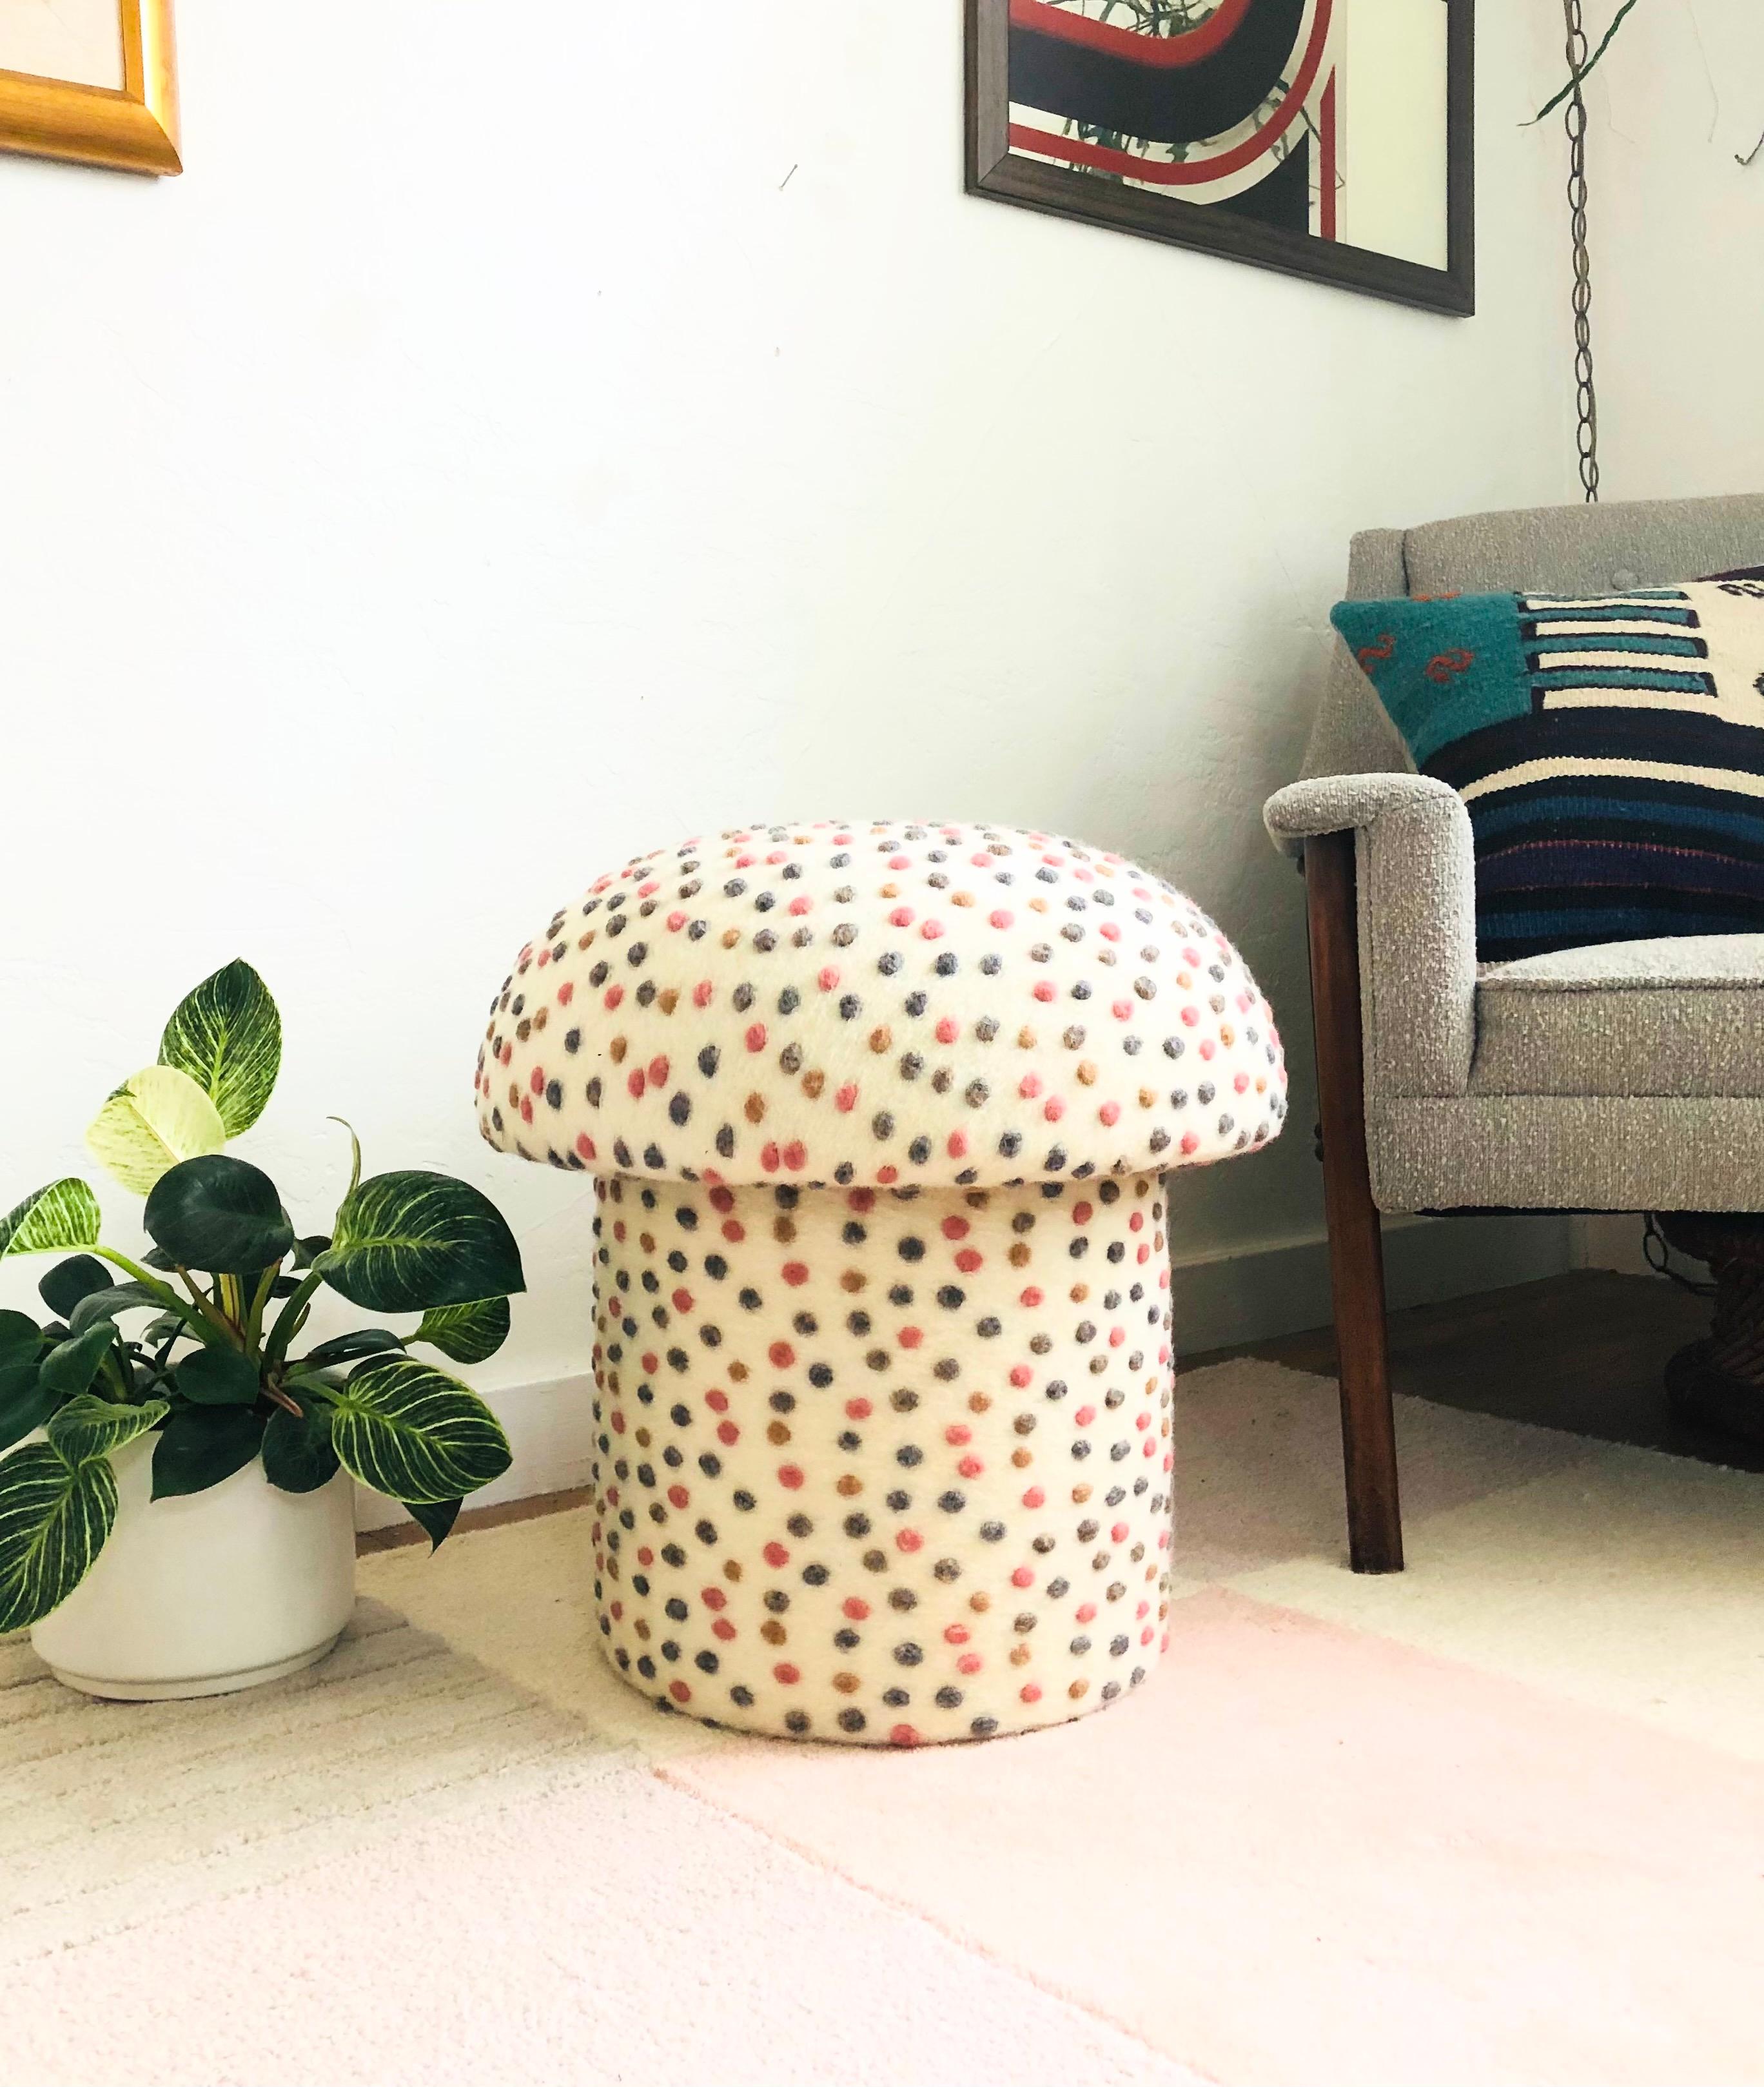 A handmade mushroom shaped ottoman, upholstered in a dotted wool blend fabric. Perfect for using as a footstool or extra occasional seating. A comfortable cushioned seat and sculptural accent piece. Fabric is a cream color with small textured dots